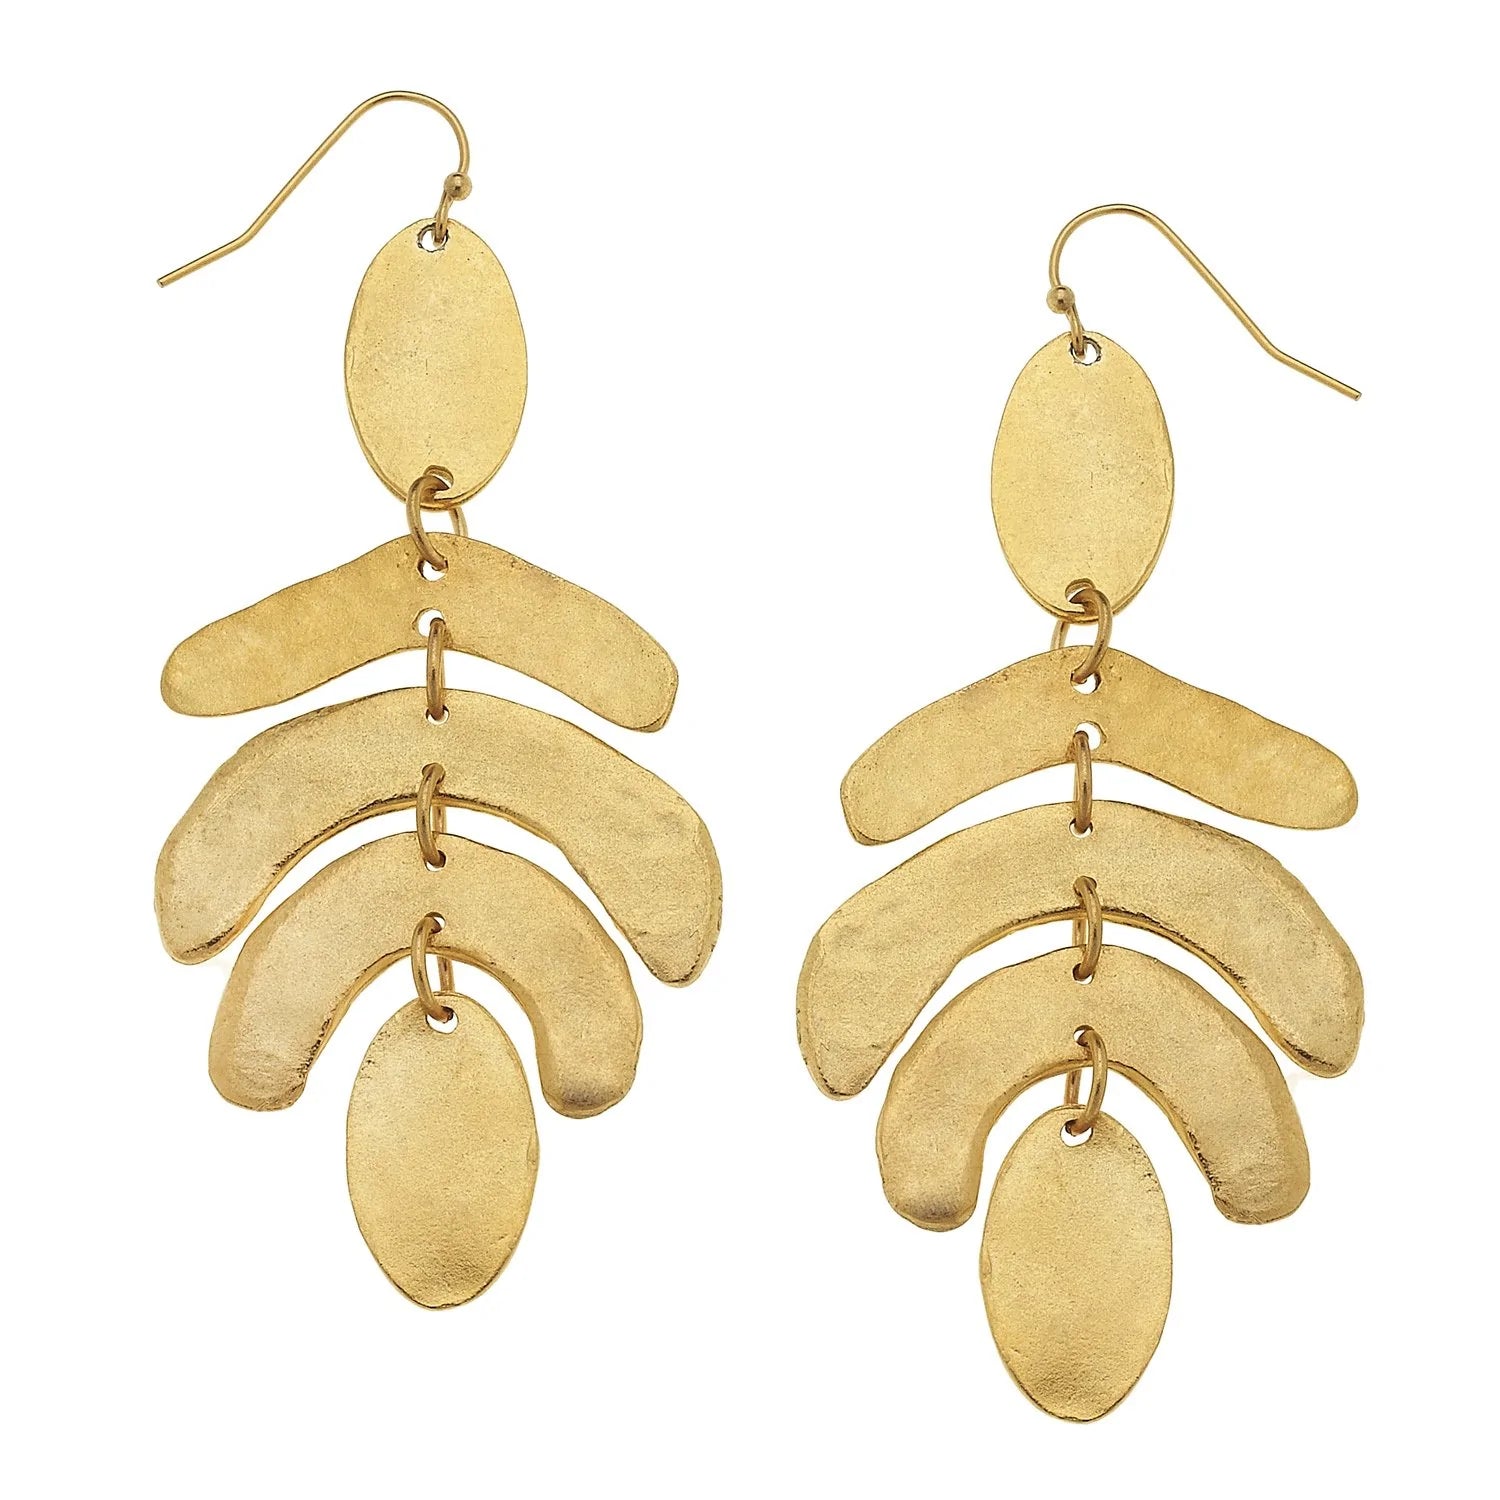 Abstract Hive Earrings